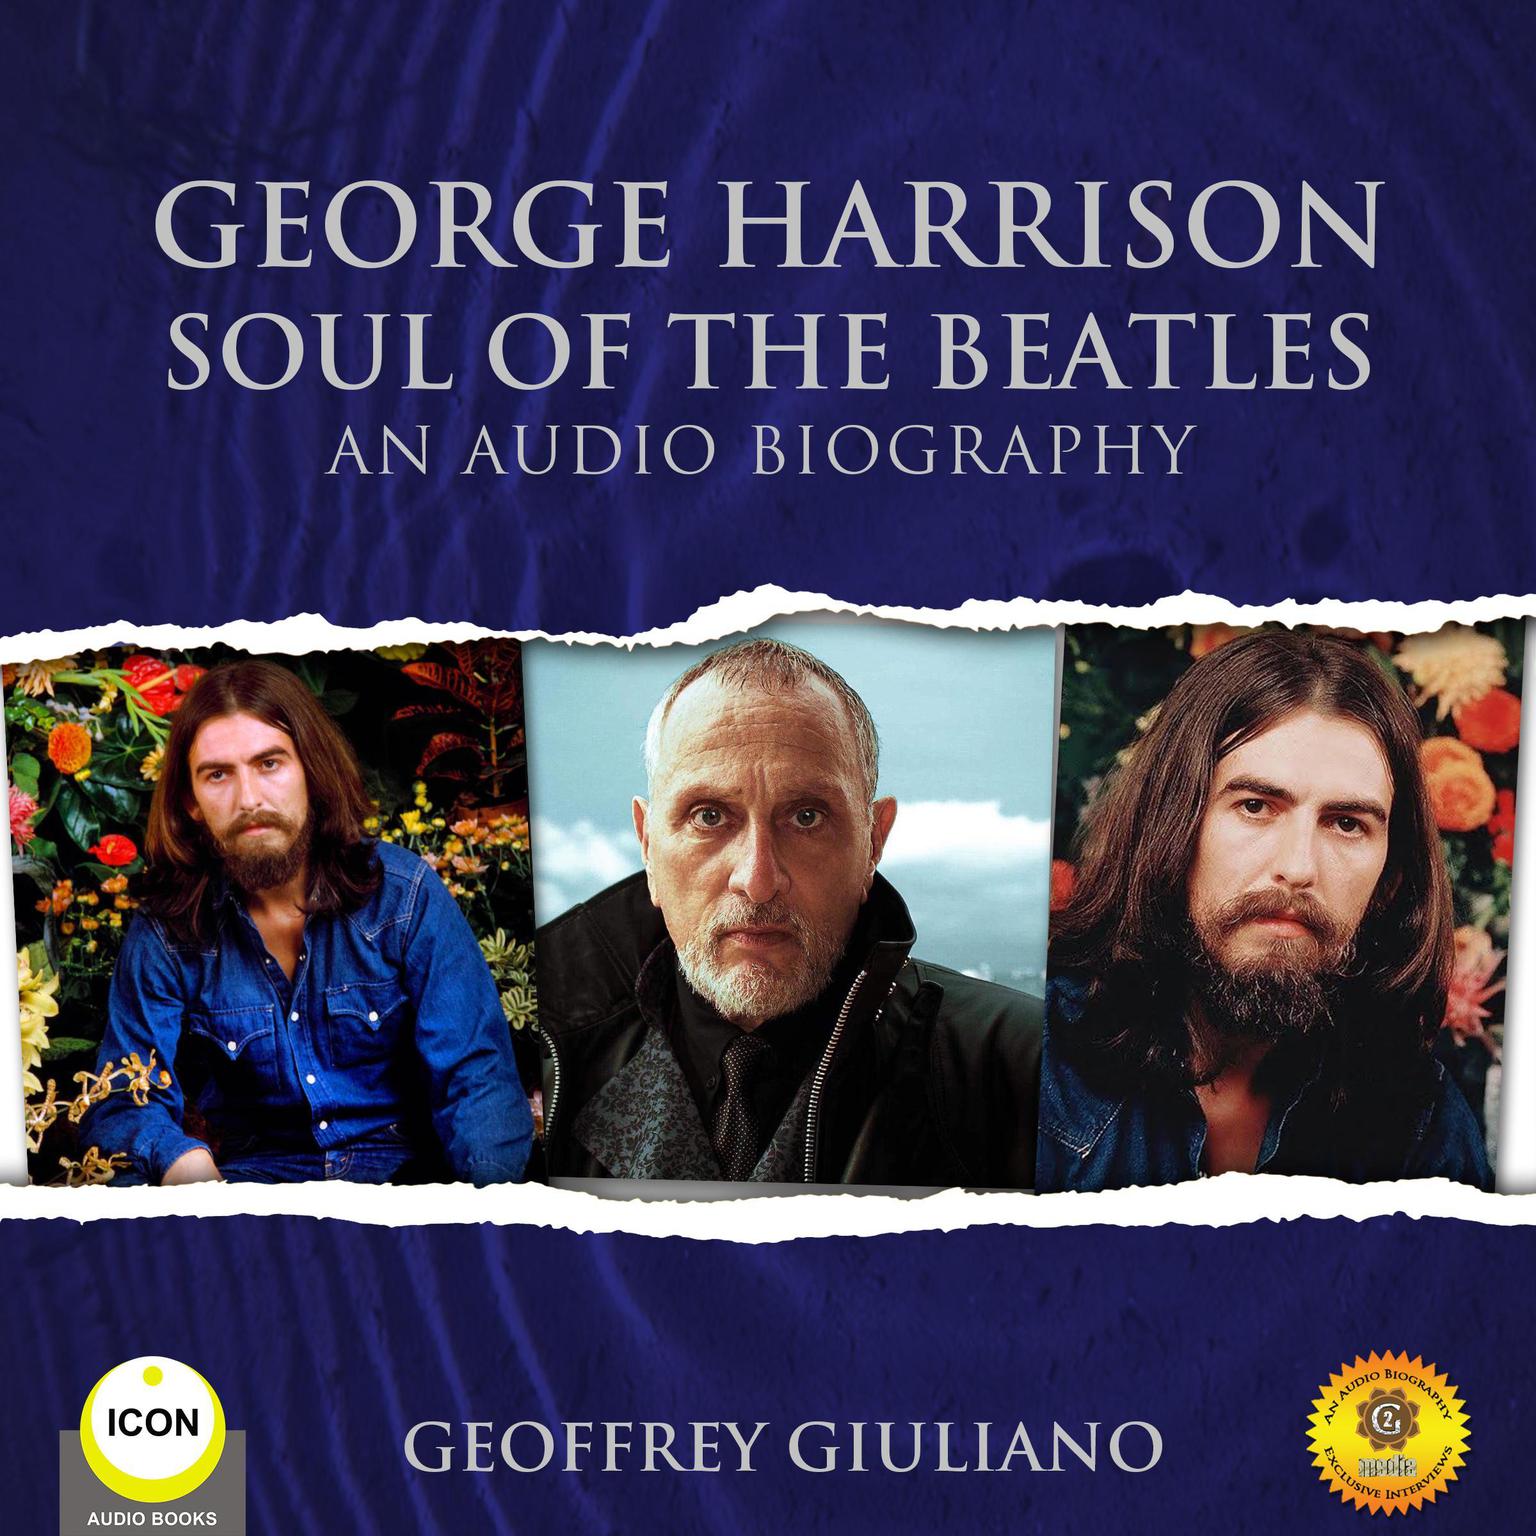 George Harrison Soul of the Beatles - An Audio Biography Audiobook, by Geoffrey Giuliano